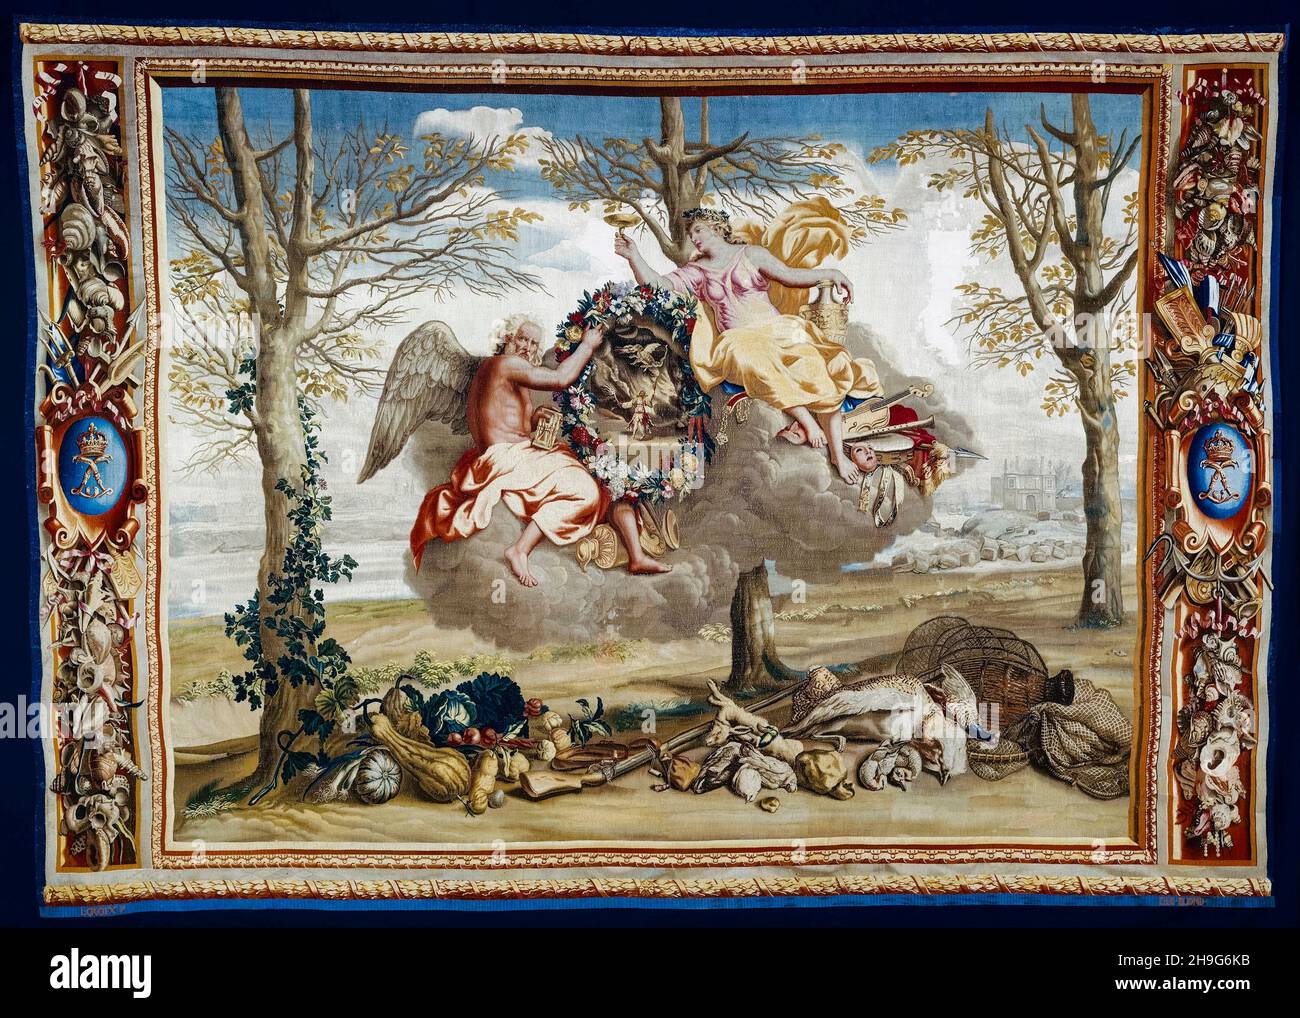 Winter from 'The Seasons', tapestry by Charles Le Brun (design), Manufacture Royale des Gobelins (woven), 1700-1720 Stock Photo